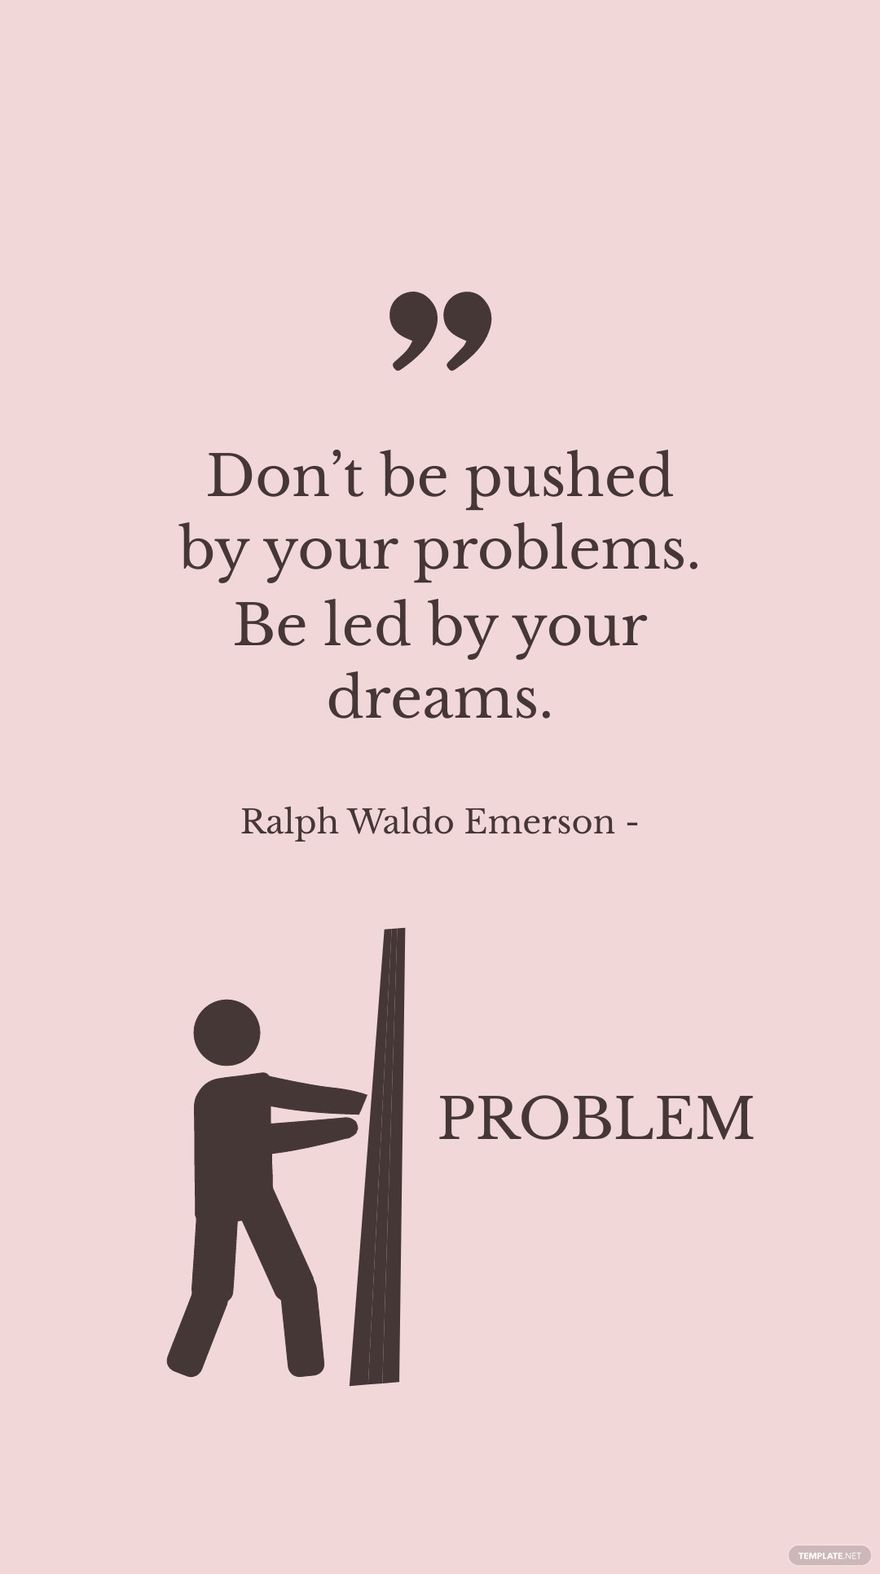 Free Ralph Waldo Emerson - Don’t be pushed by your problems. Be led by your dreams. in JPG